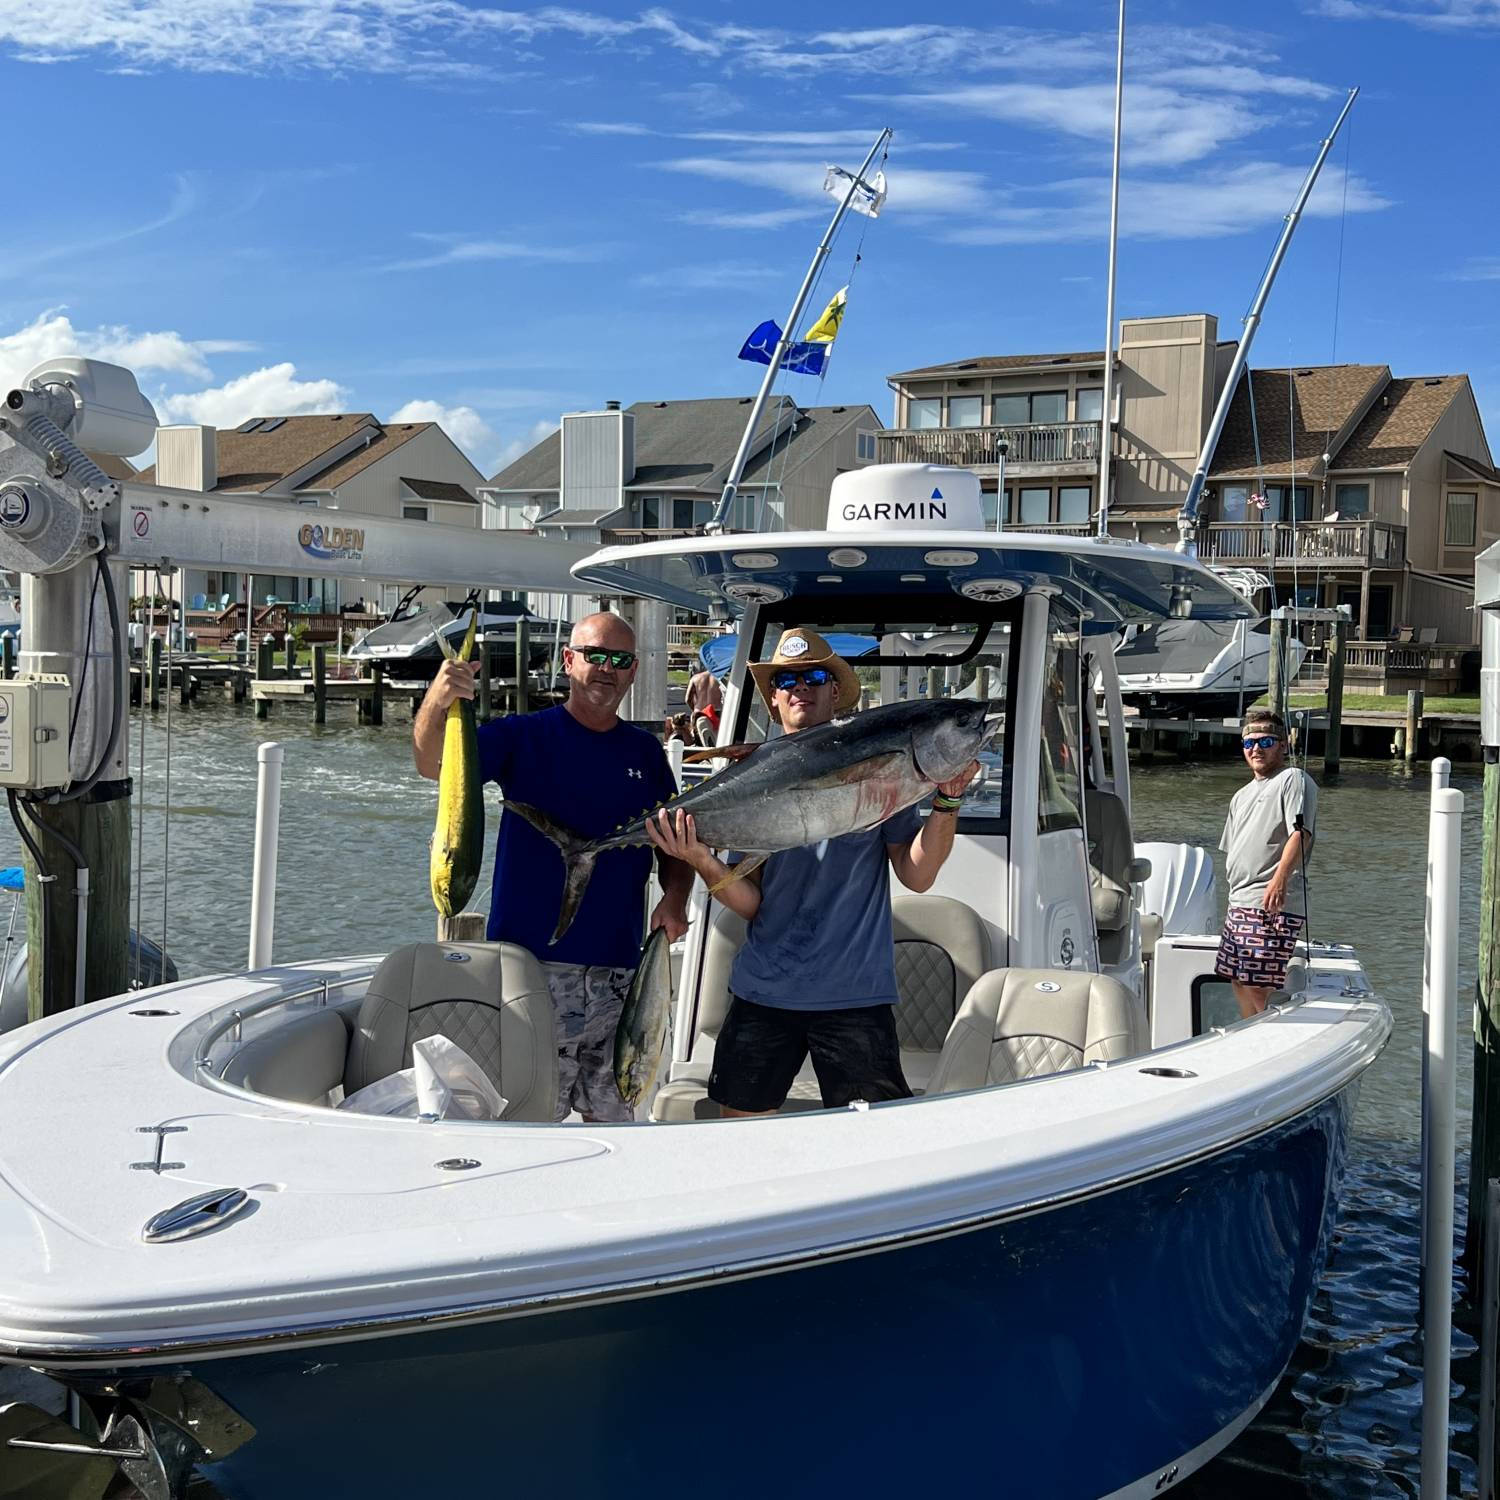 Title: Nice catch! - On board their Sportsman Open 282 Center Console - Location: Ocean City, MD. Participating in the Photo Contest #SportsmanJanuary2023